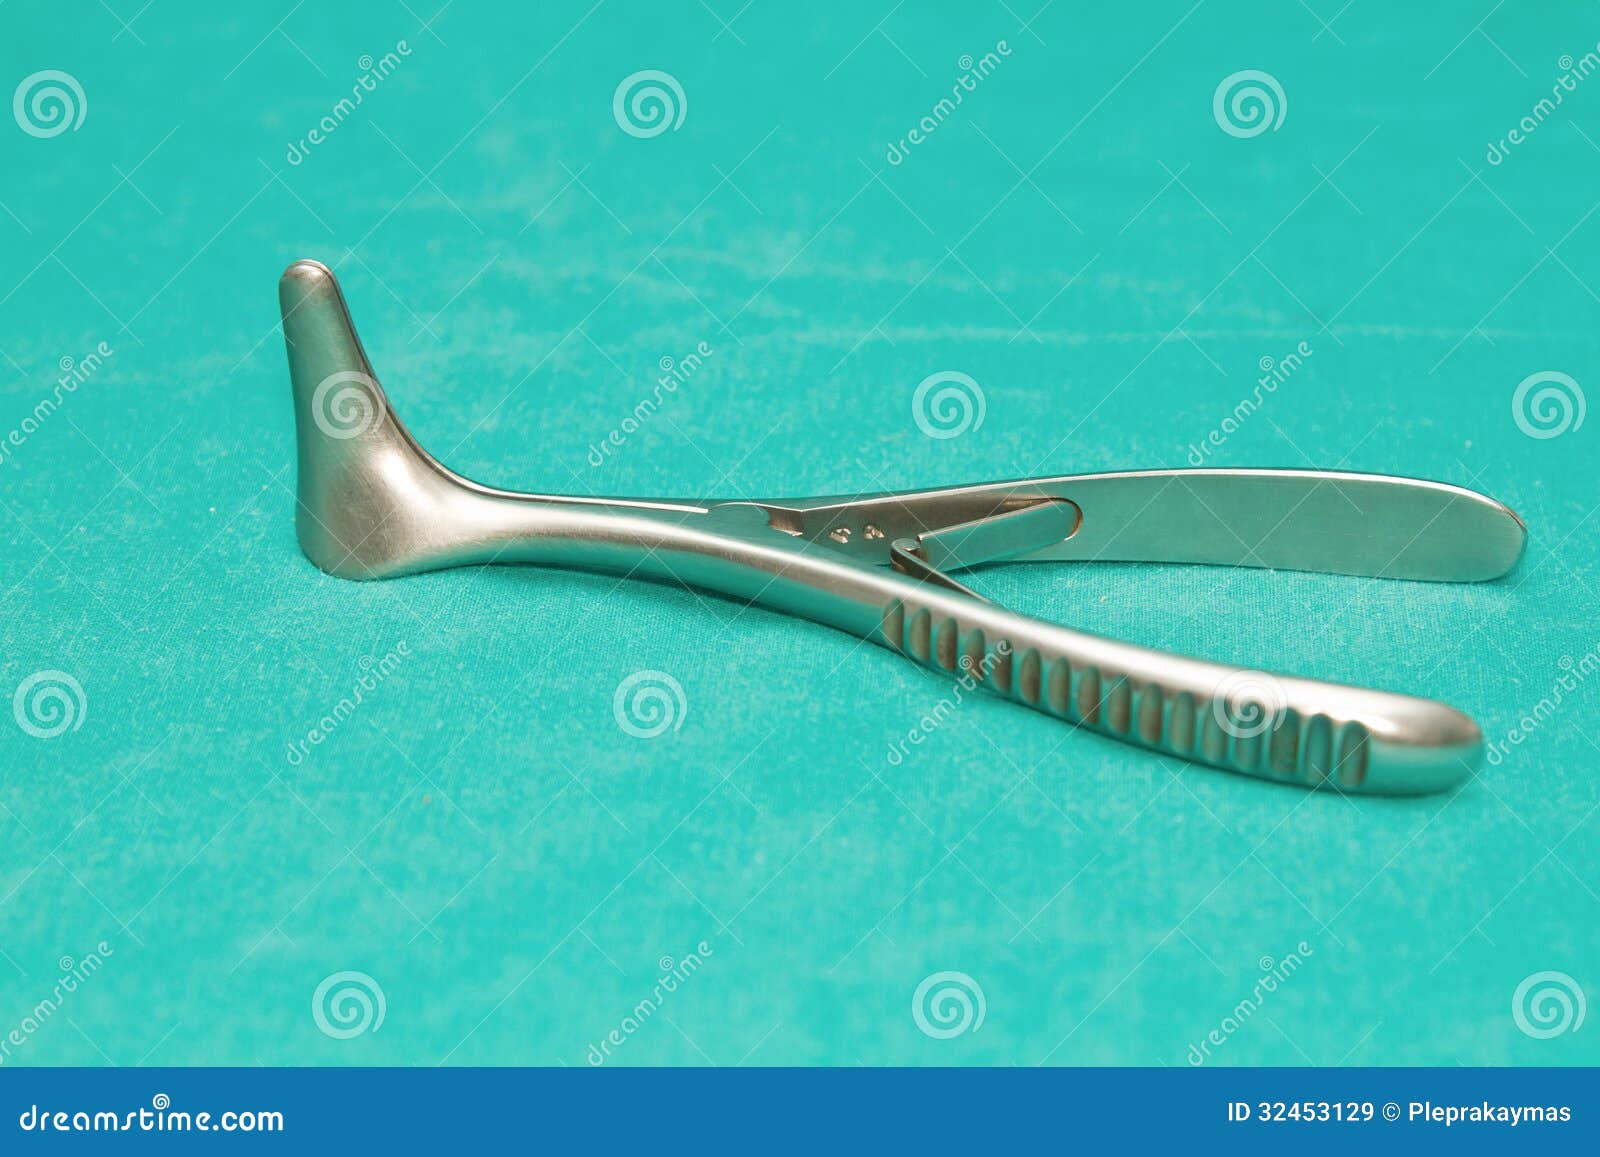 nasal speculum,surgical instruments for rhino plasty